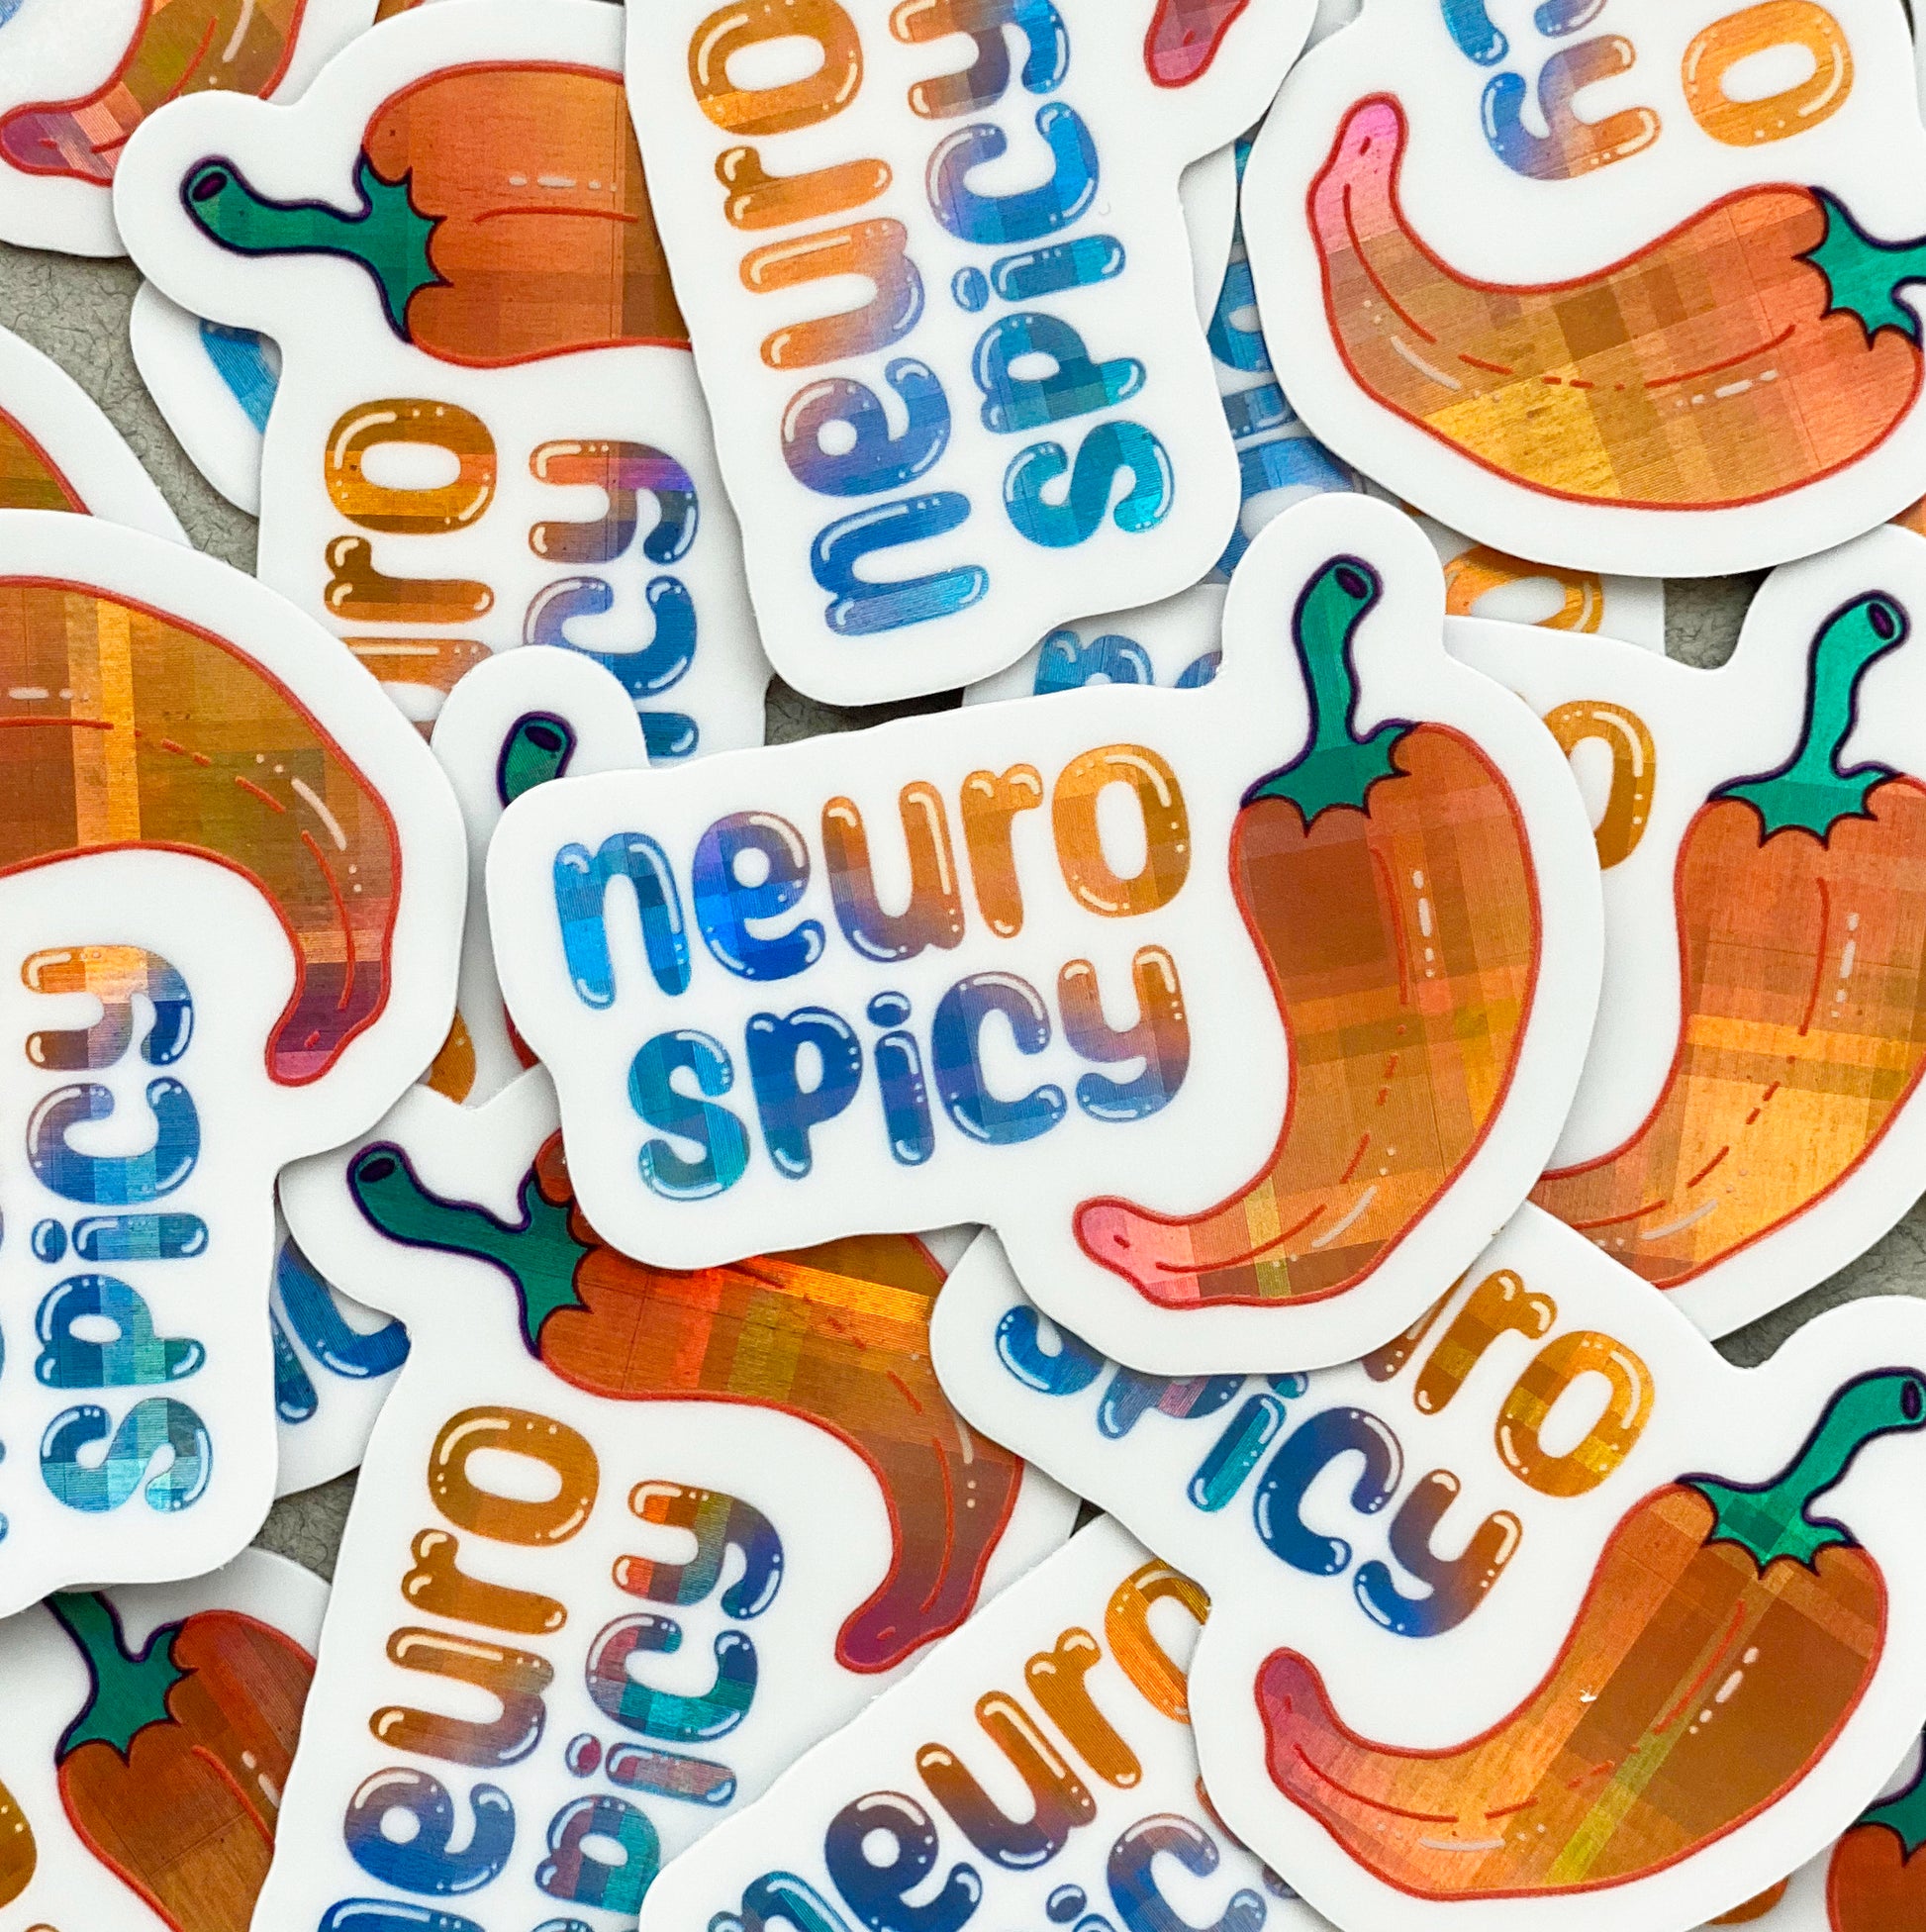 A pile of holographic vinyl stickers with an illustration of a pepper and the words "neuro spicy". The holographic material is a blue to purple to orange gradient pattern with a plaid effect.